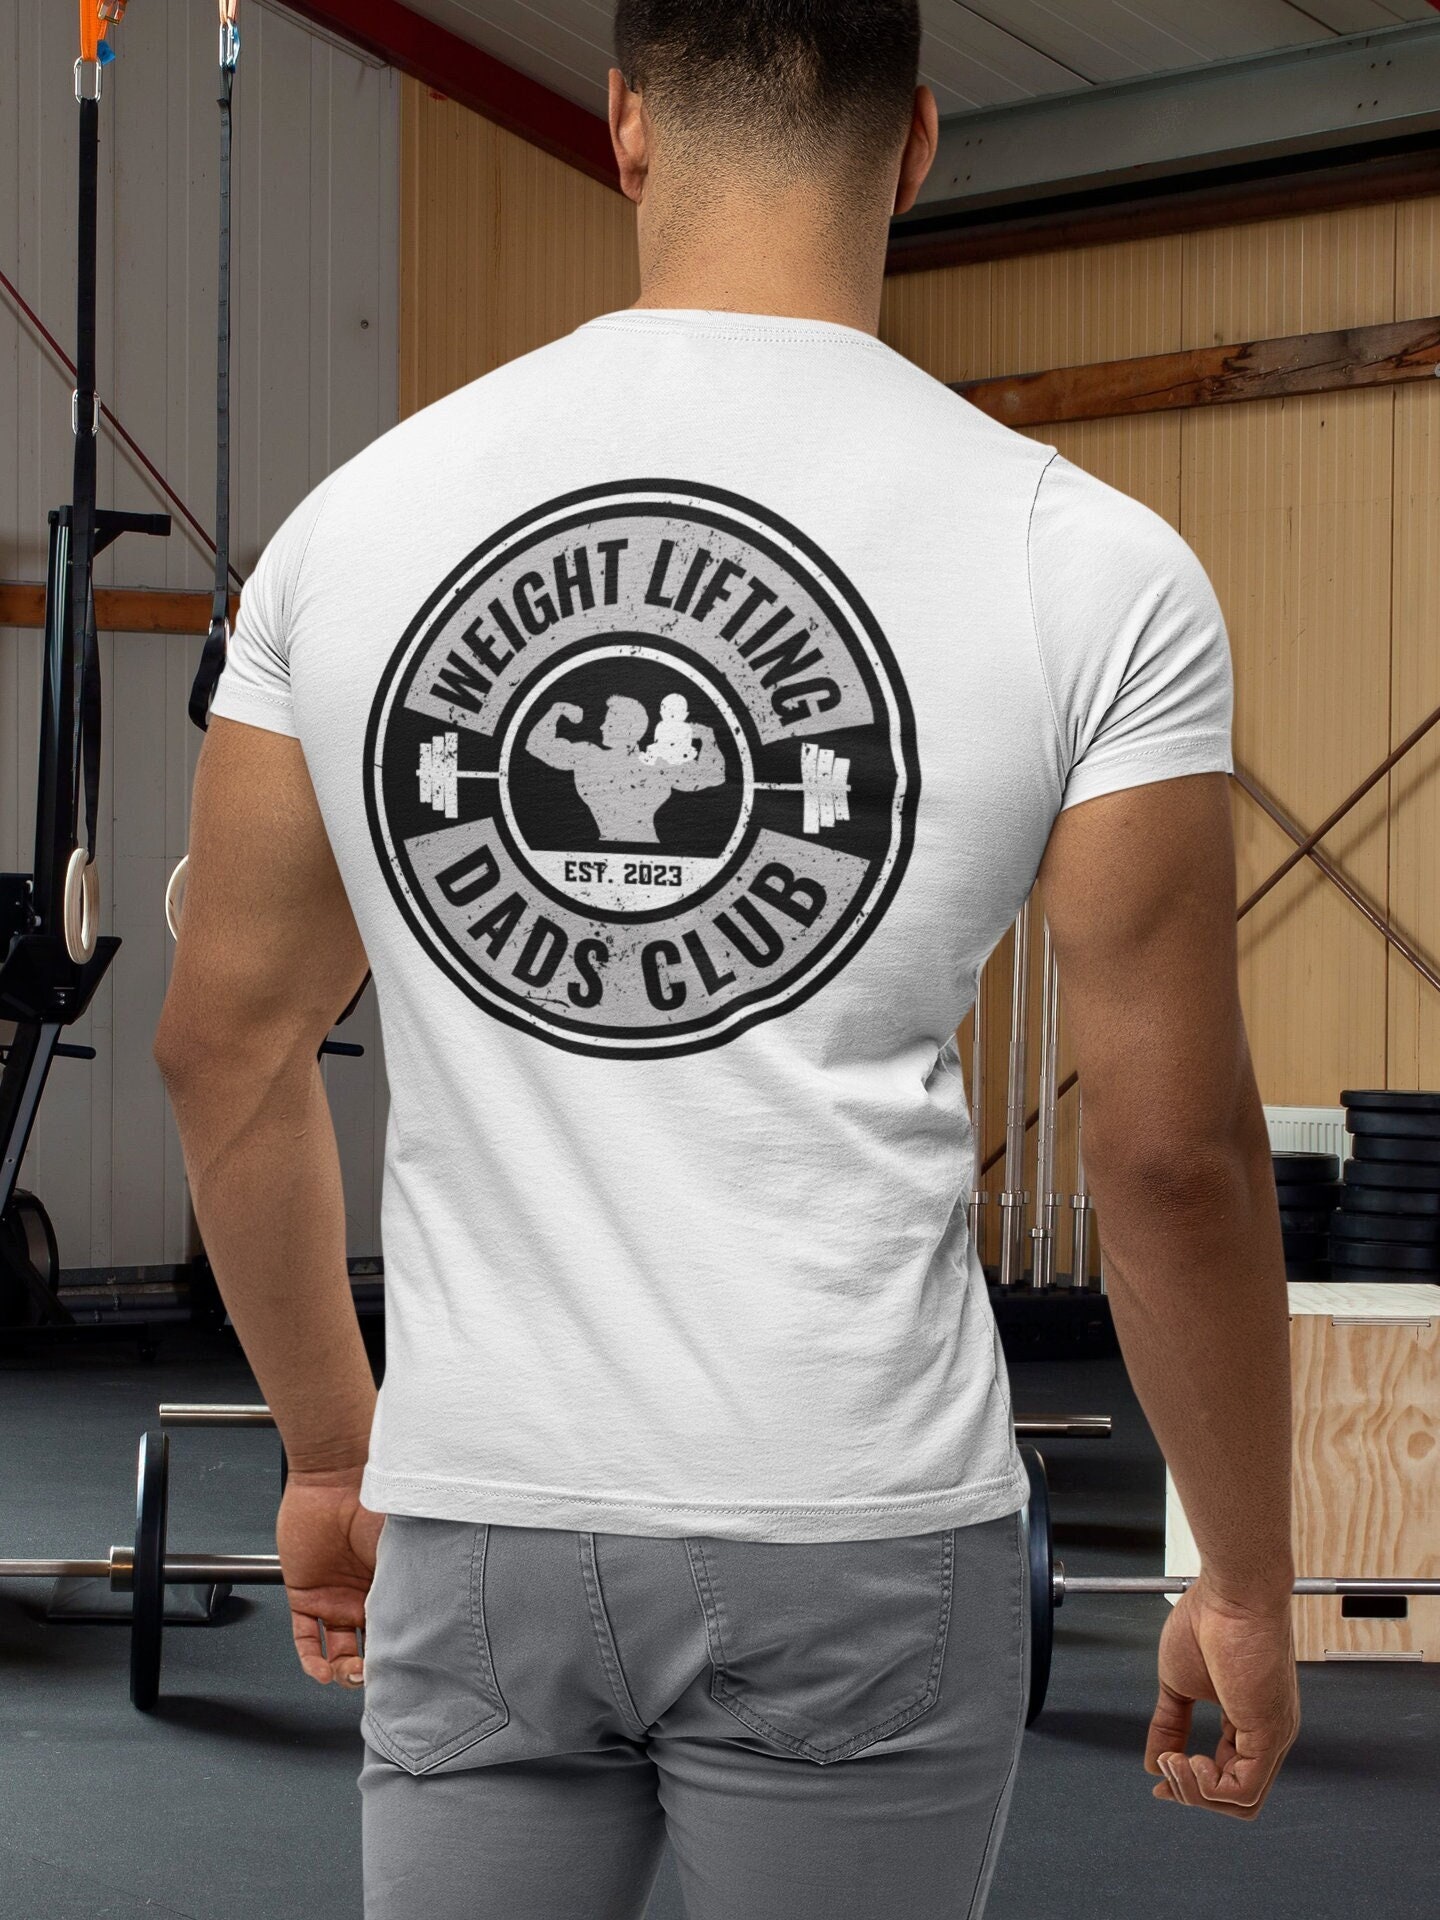 Funny Mens Weightlifting T-shirt, Boy Weight Lifter Gift